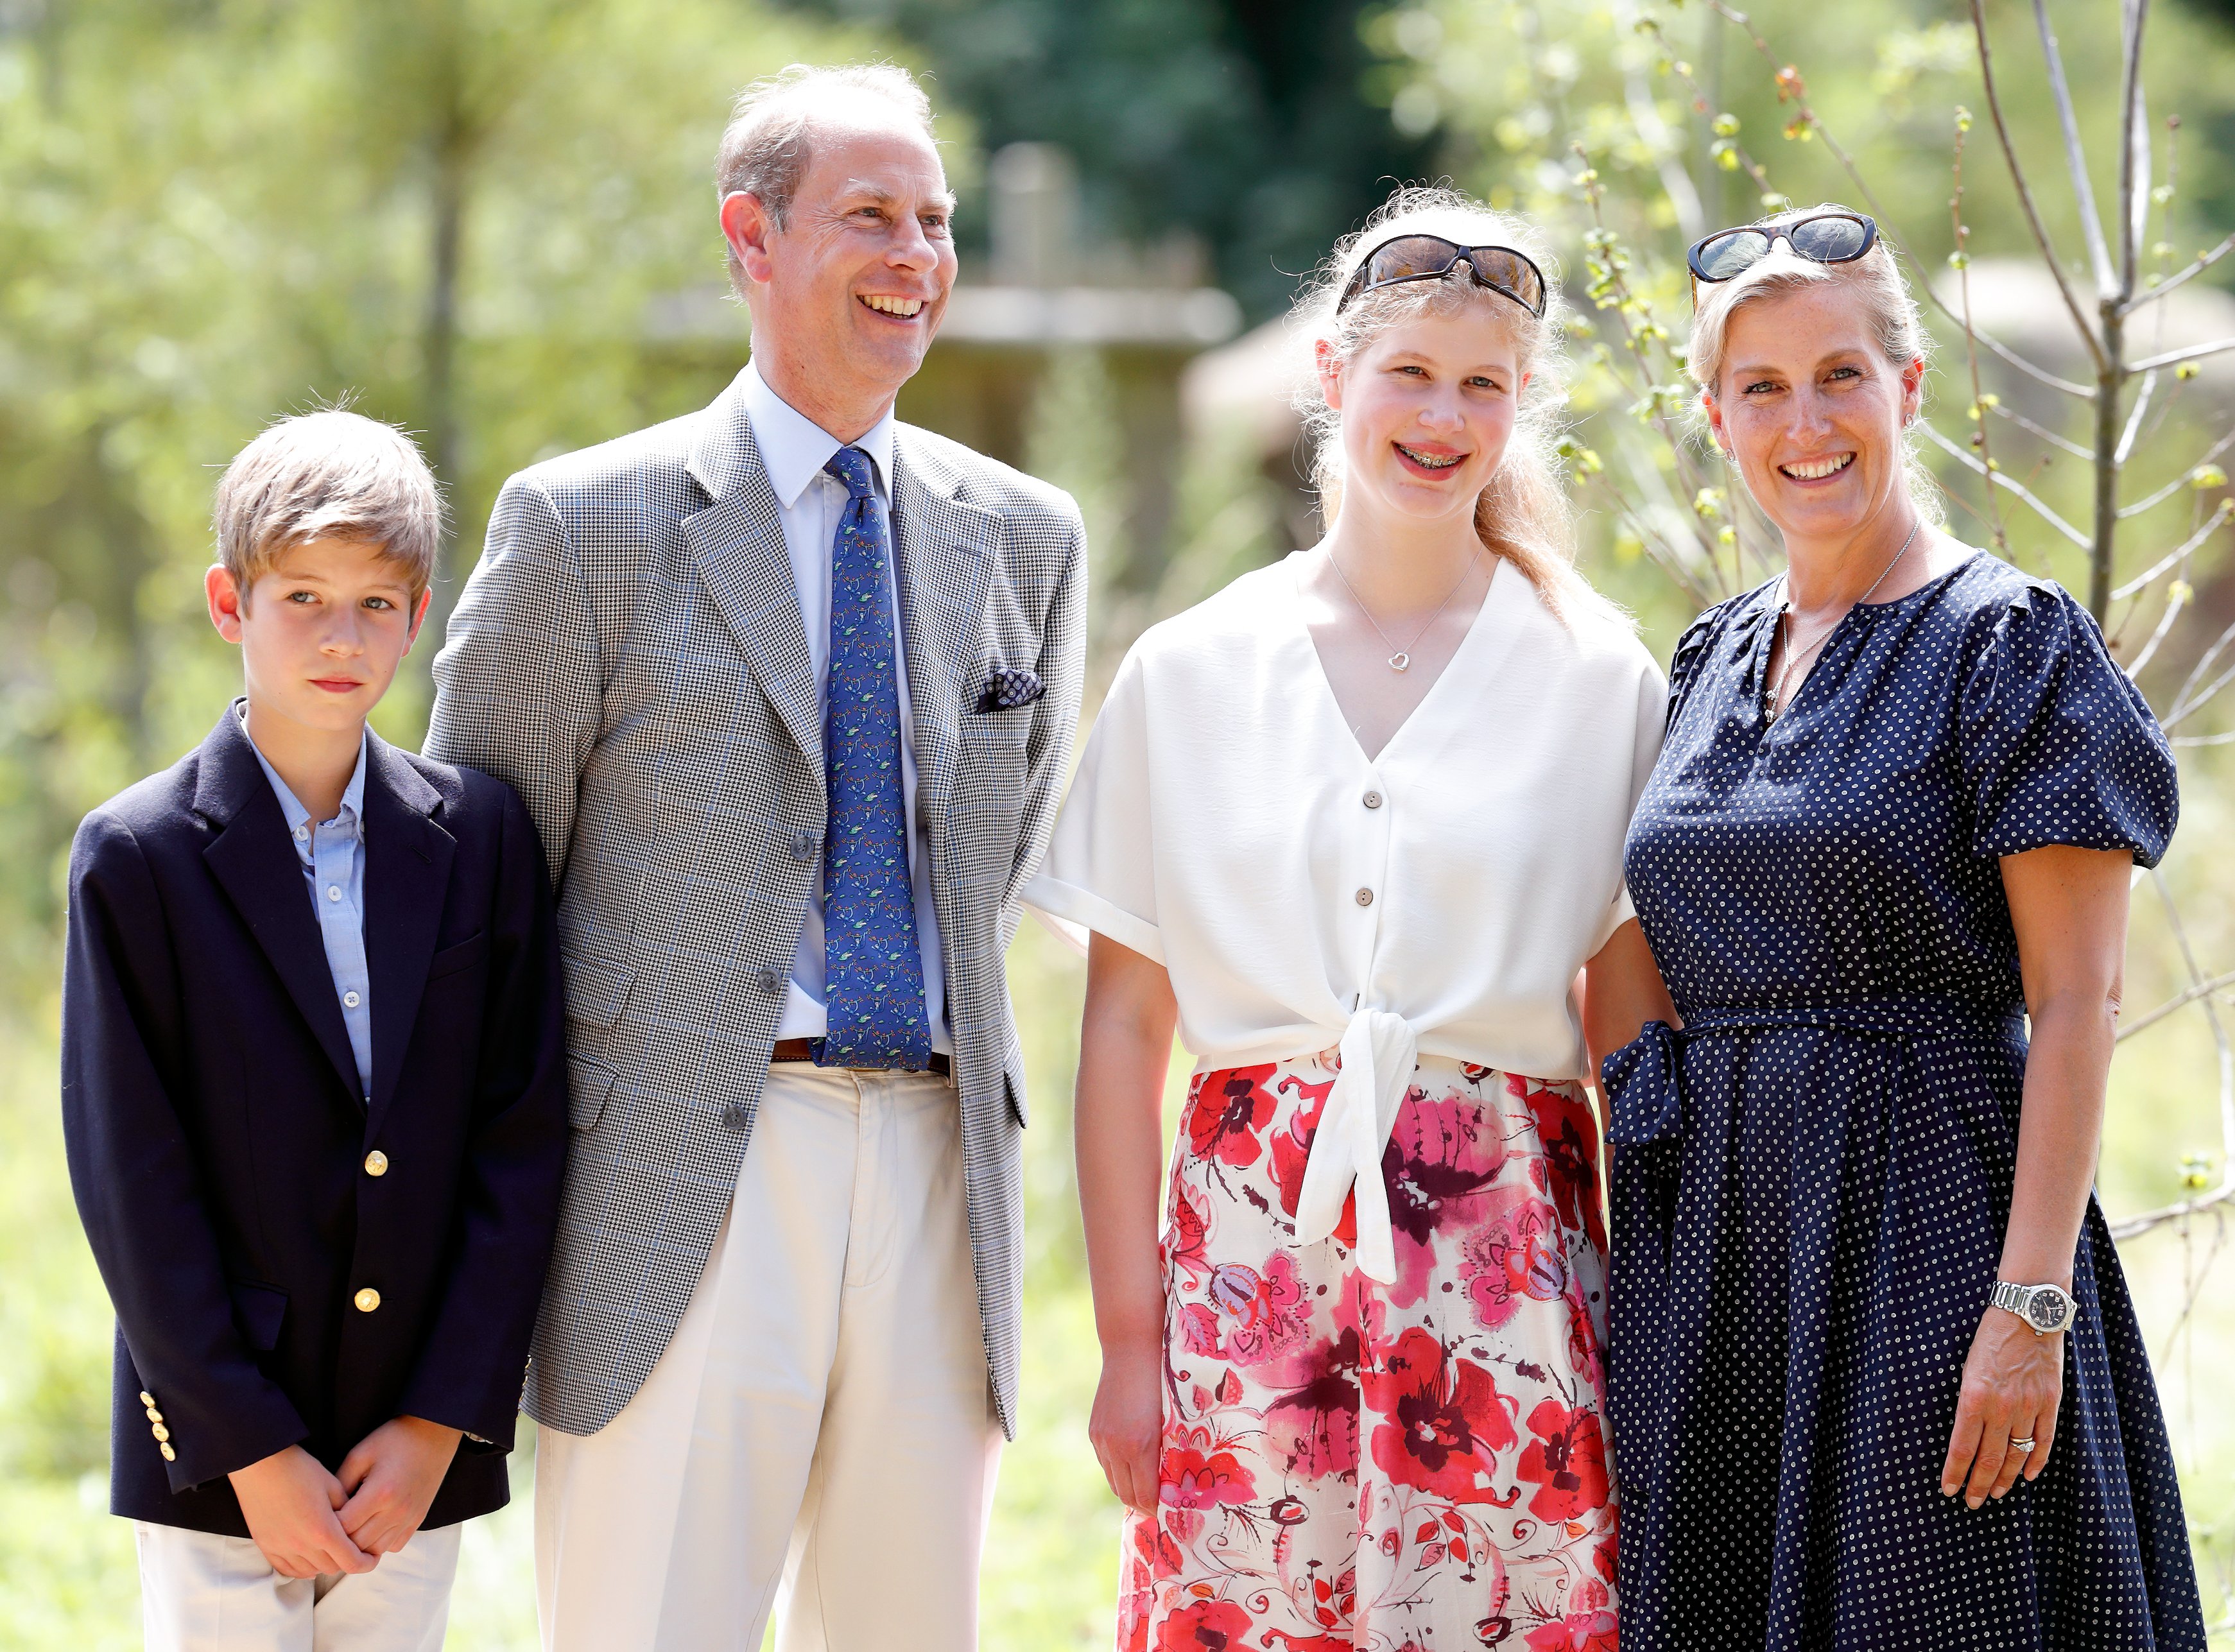 James, Viscount Severn, Prince Edward, Earl of Wessex, Lady Louise Windsor and Sophie, Countess of Wessex visit The Wild Place Project at Bristol Zoo on July 23, 2019 in Bristol, England.  | Source: Getty Images